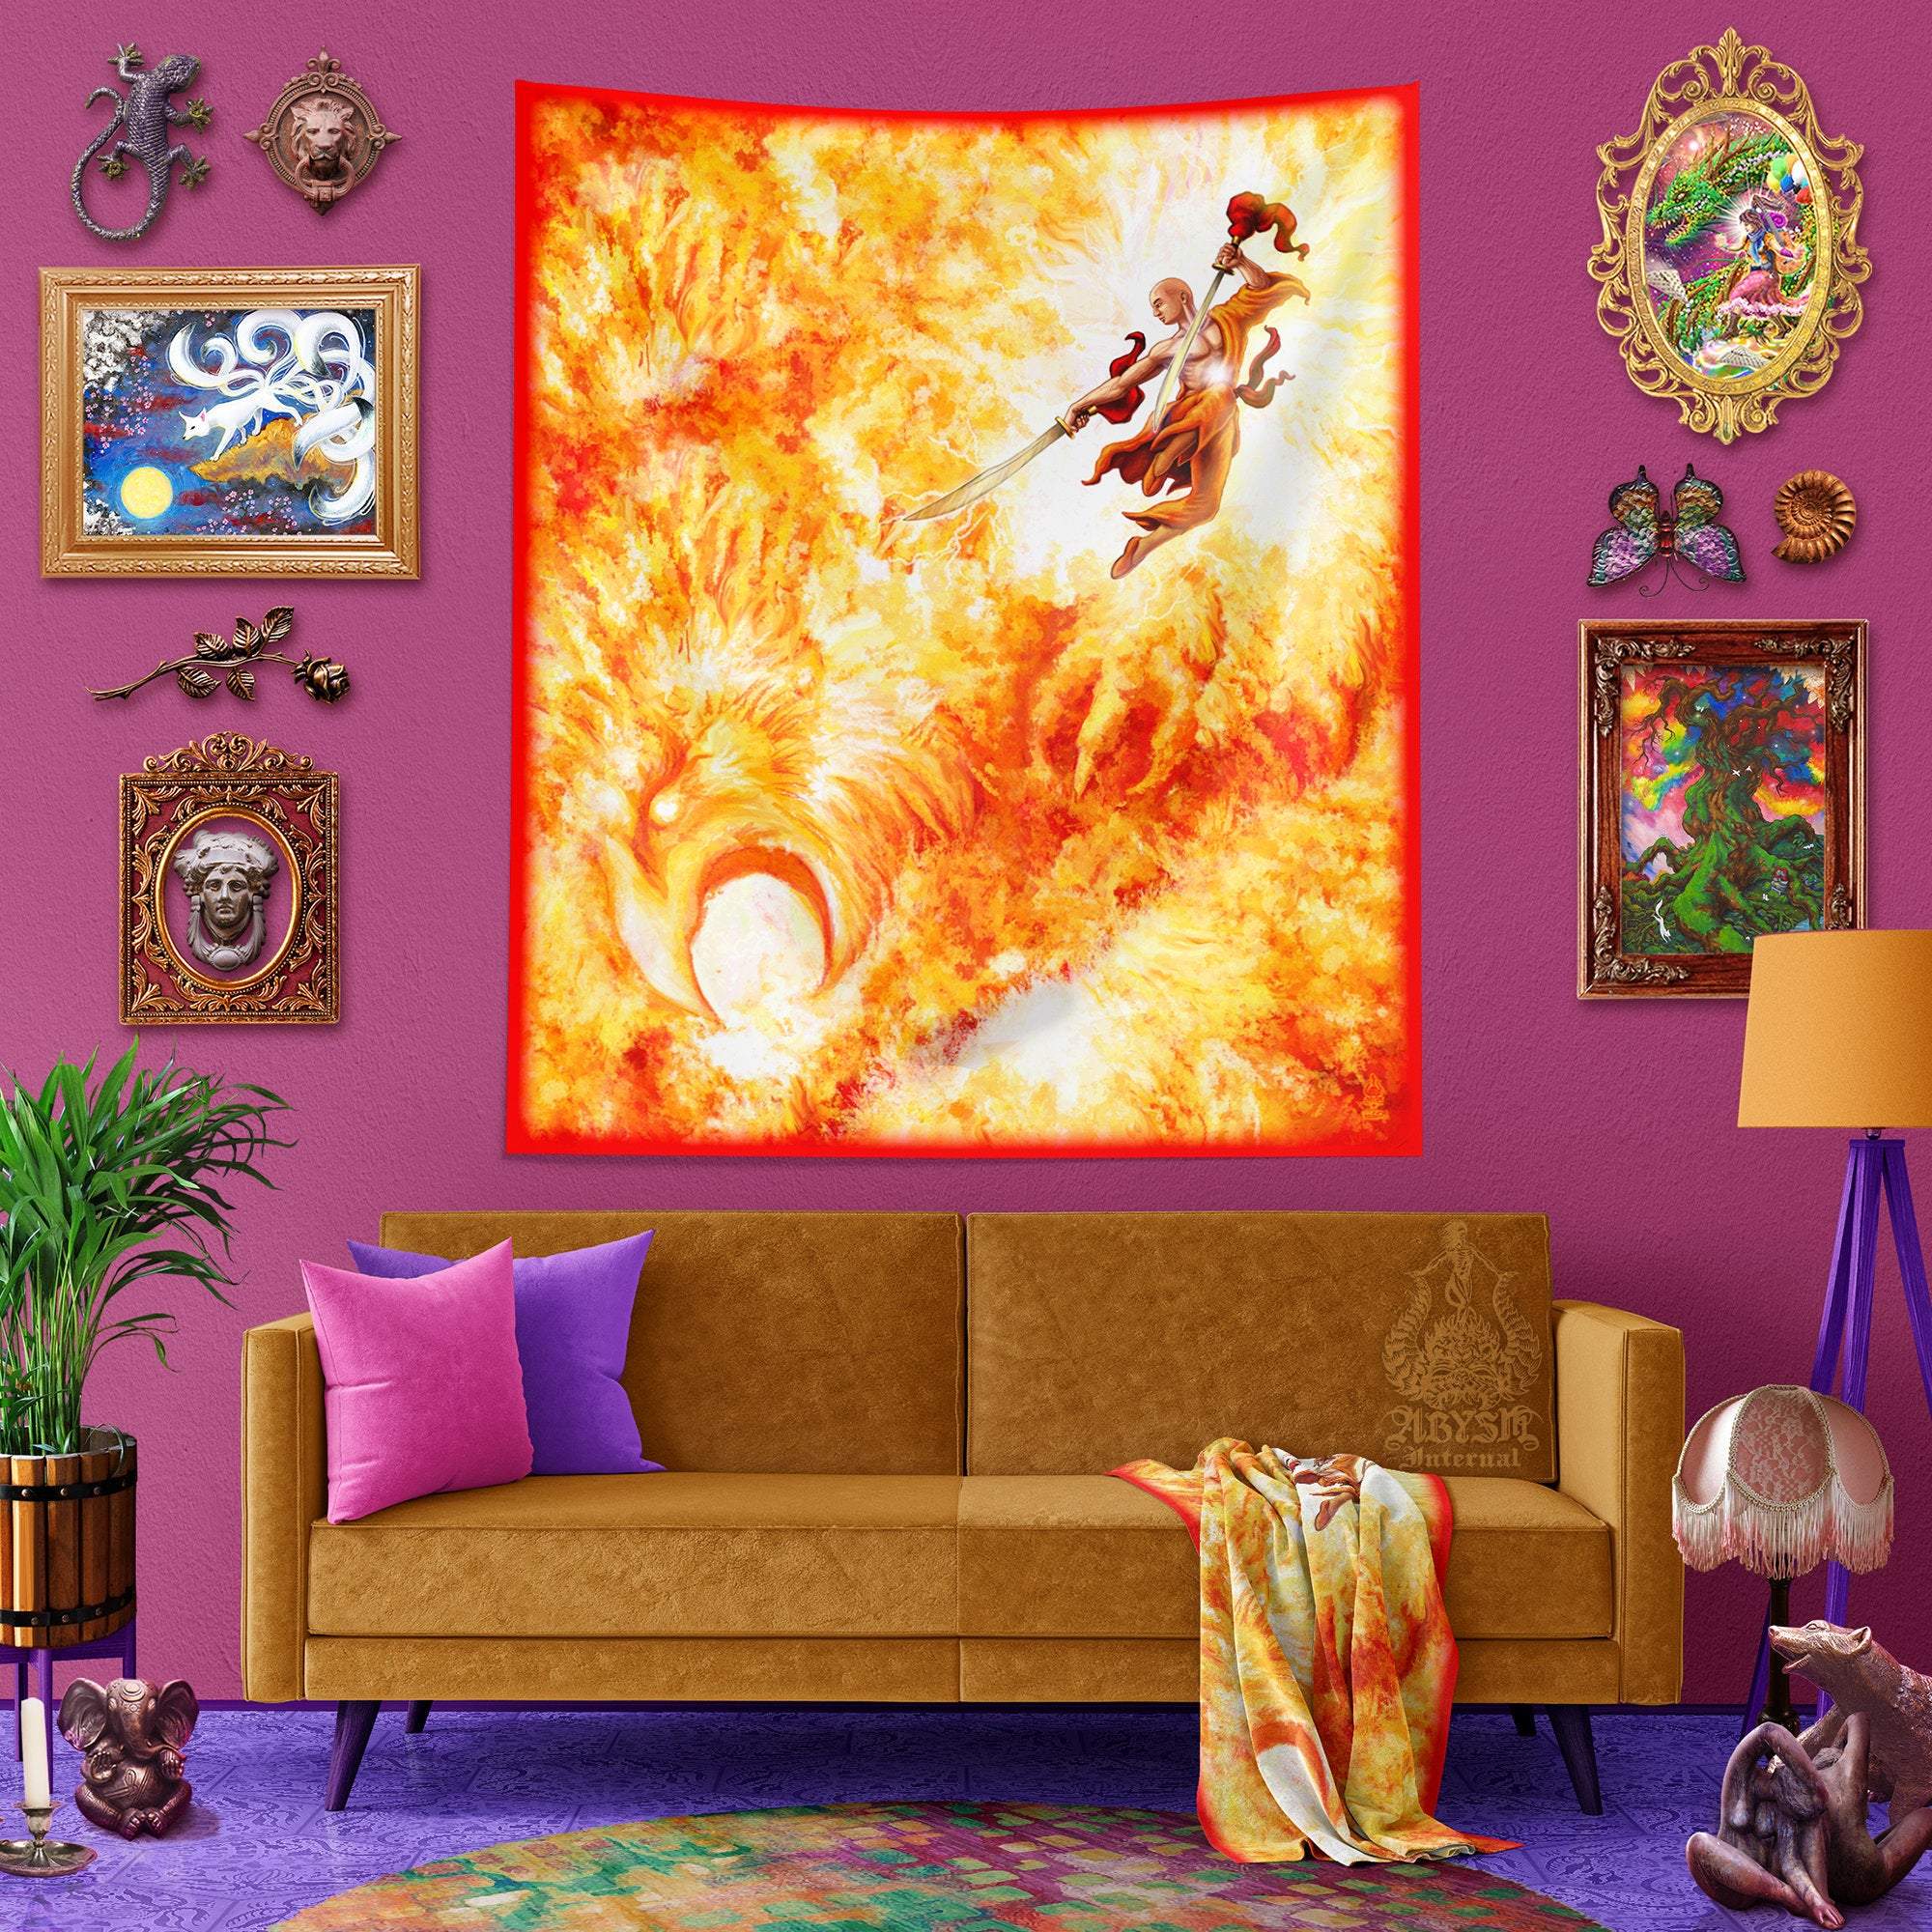 Kids Tapestry, Children Wall Hanging, Eclectic Home Decor, Art Print, Eclectic and Funky - Shaolin Monk, Kung Fu - Abysm Internal